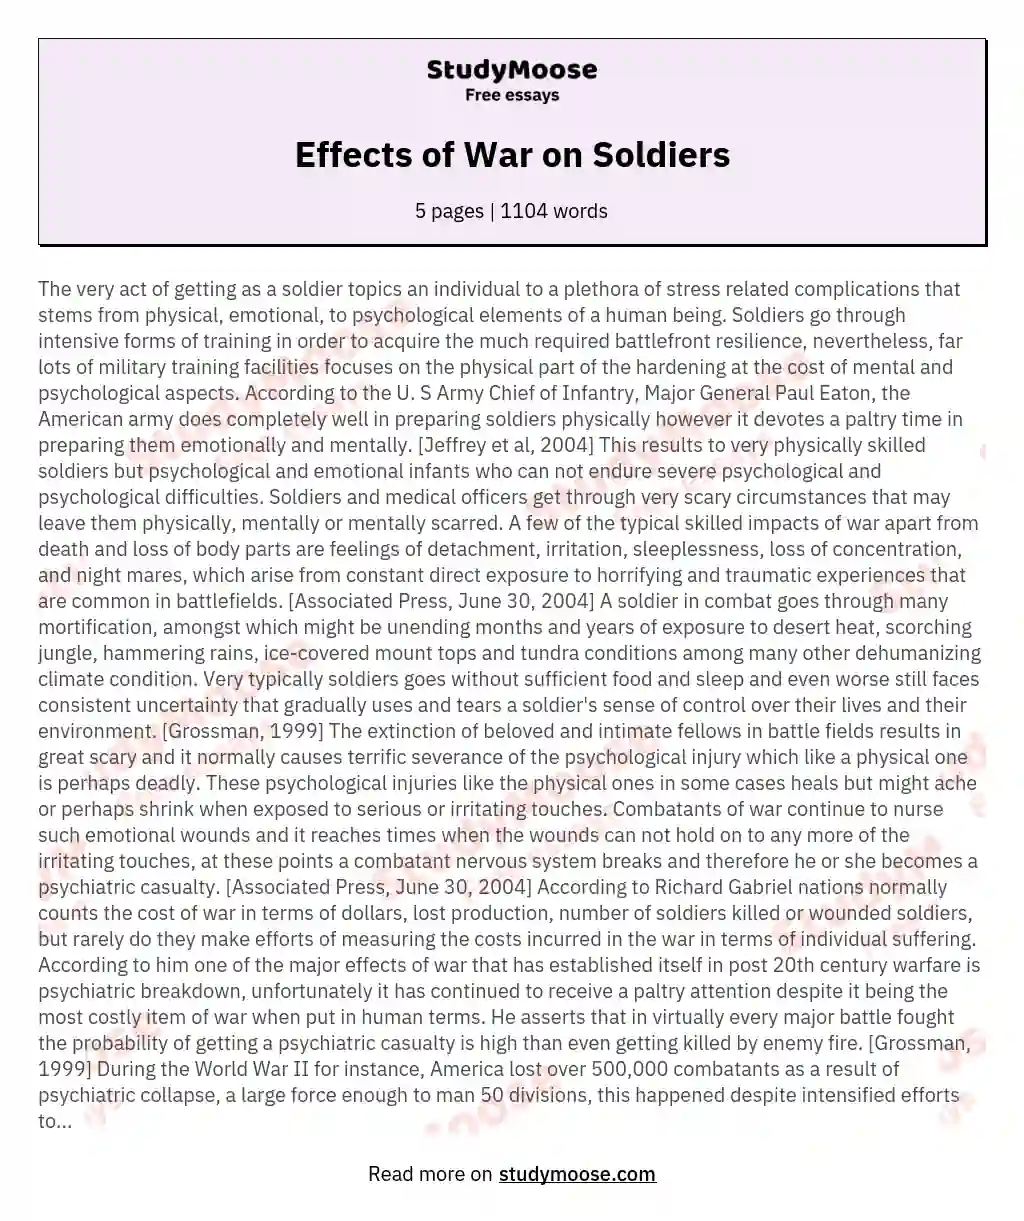 Effects of War on Soldiers